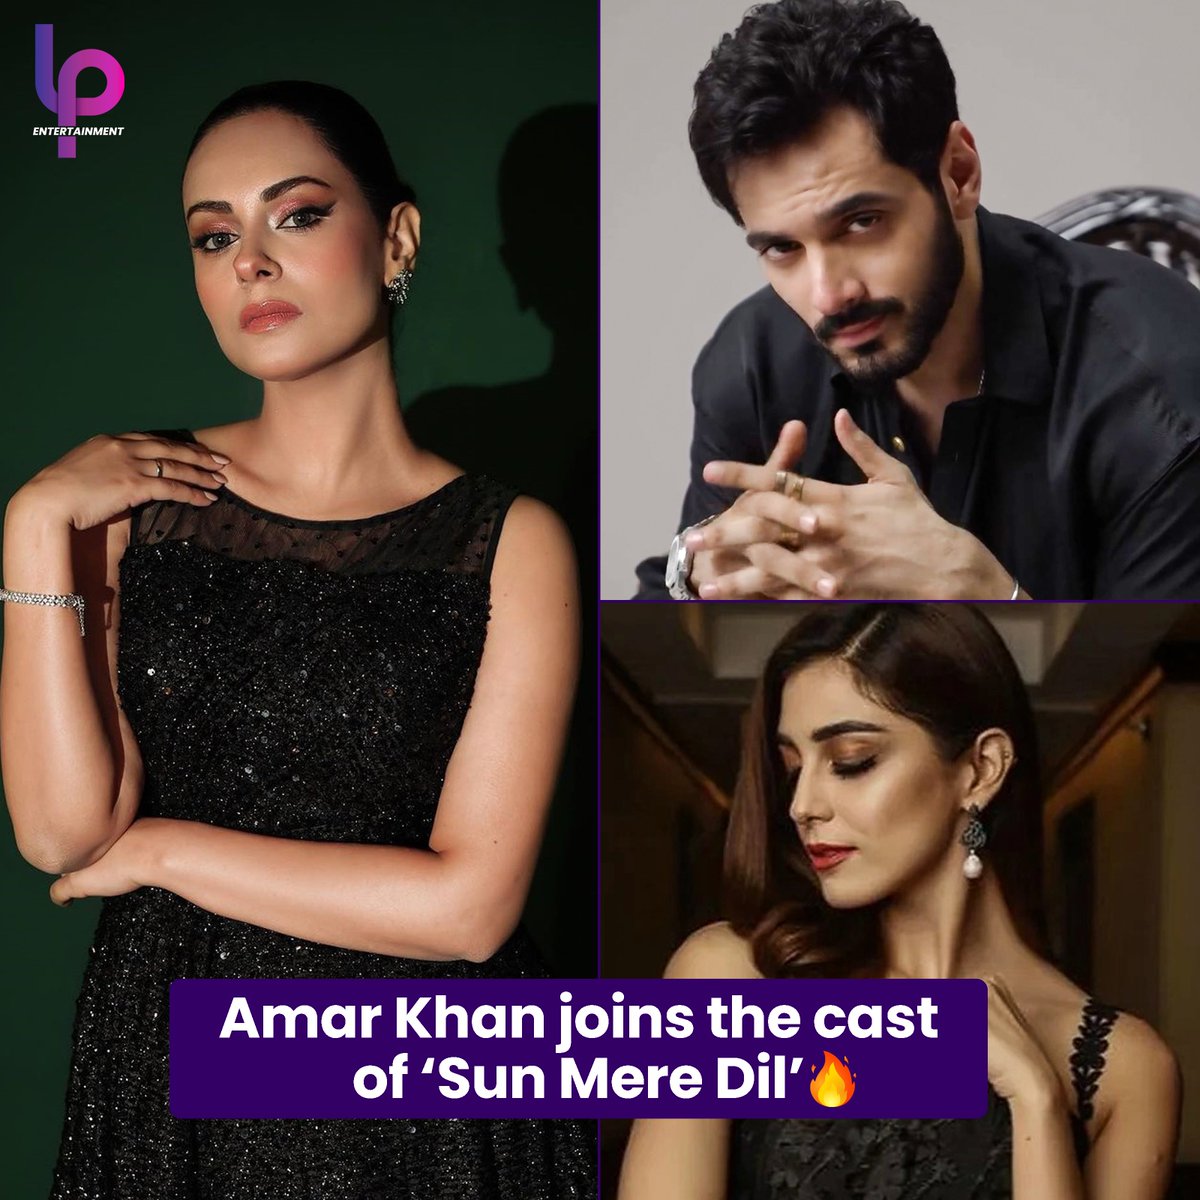 Much awaited upcoming drama serial 'Sun Mere Dil' has just got bigger and better as Amar Khan also joins the cast of the drama. Promos releasing soon on Geo Entertainment TV. 🔥🙌 #WahajAli #MayaAli #UsamaKhan #HiraMani #AmarKhan #UpcomingDramas #LPEntertaiment